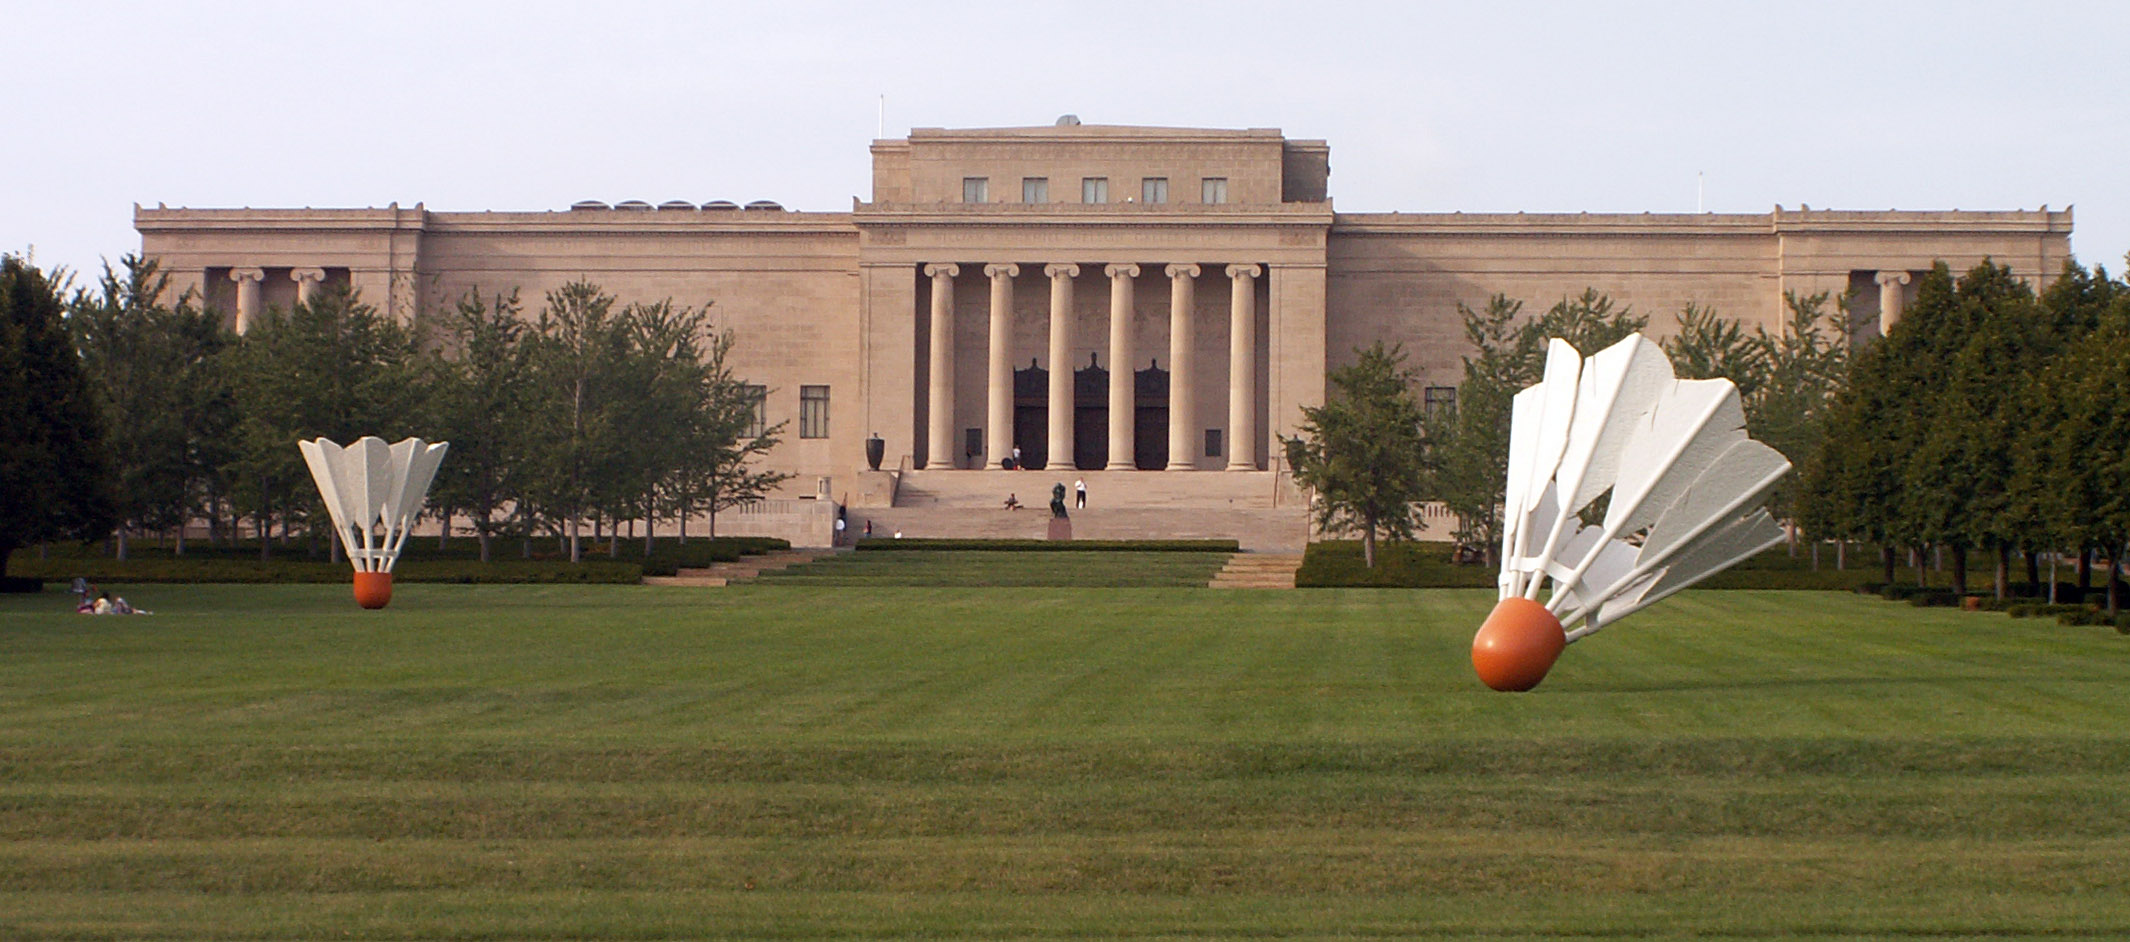 September 2007 image of ‘Shuttlecocks,’ a sculpture by Claes Oldenburg and Coosje van Bruggen, outside the Nelson-Atkins Museum of Art. The work became so connected with the Kansas City, Missouri museum that it ultimately adopted it as its logo. Image courtesy of Wikimedia Commons, photo credit Americasroof. Shared under the Creative Commons Attribution-Share Alike 3.0 Unported license.